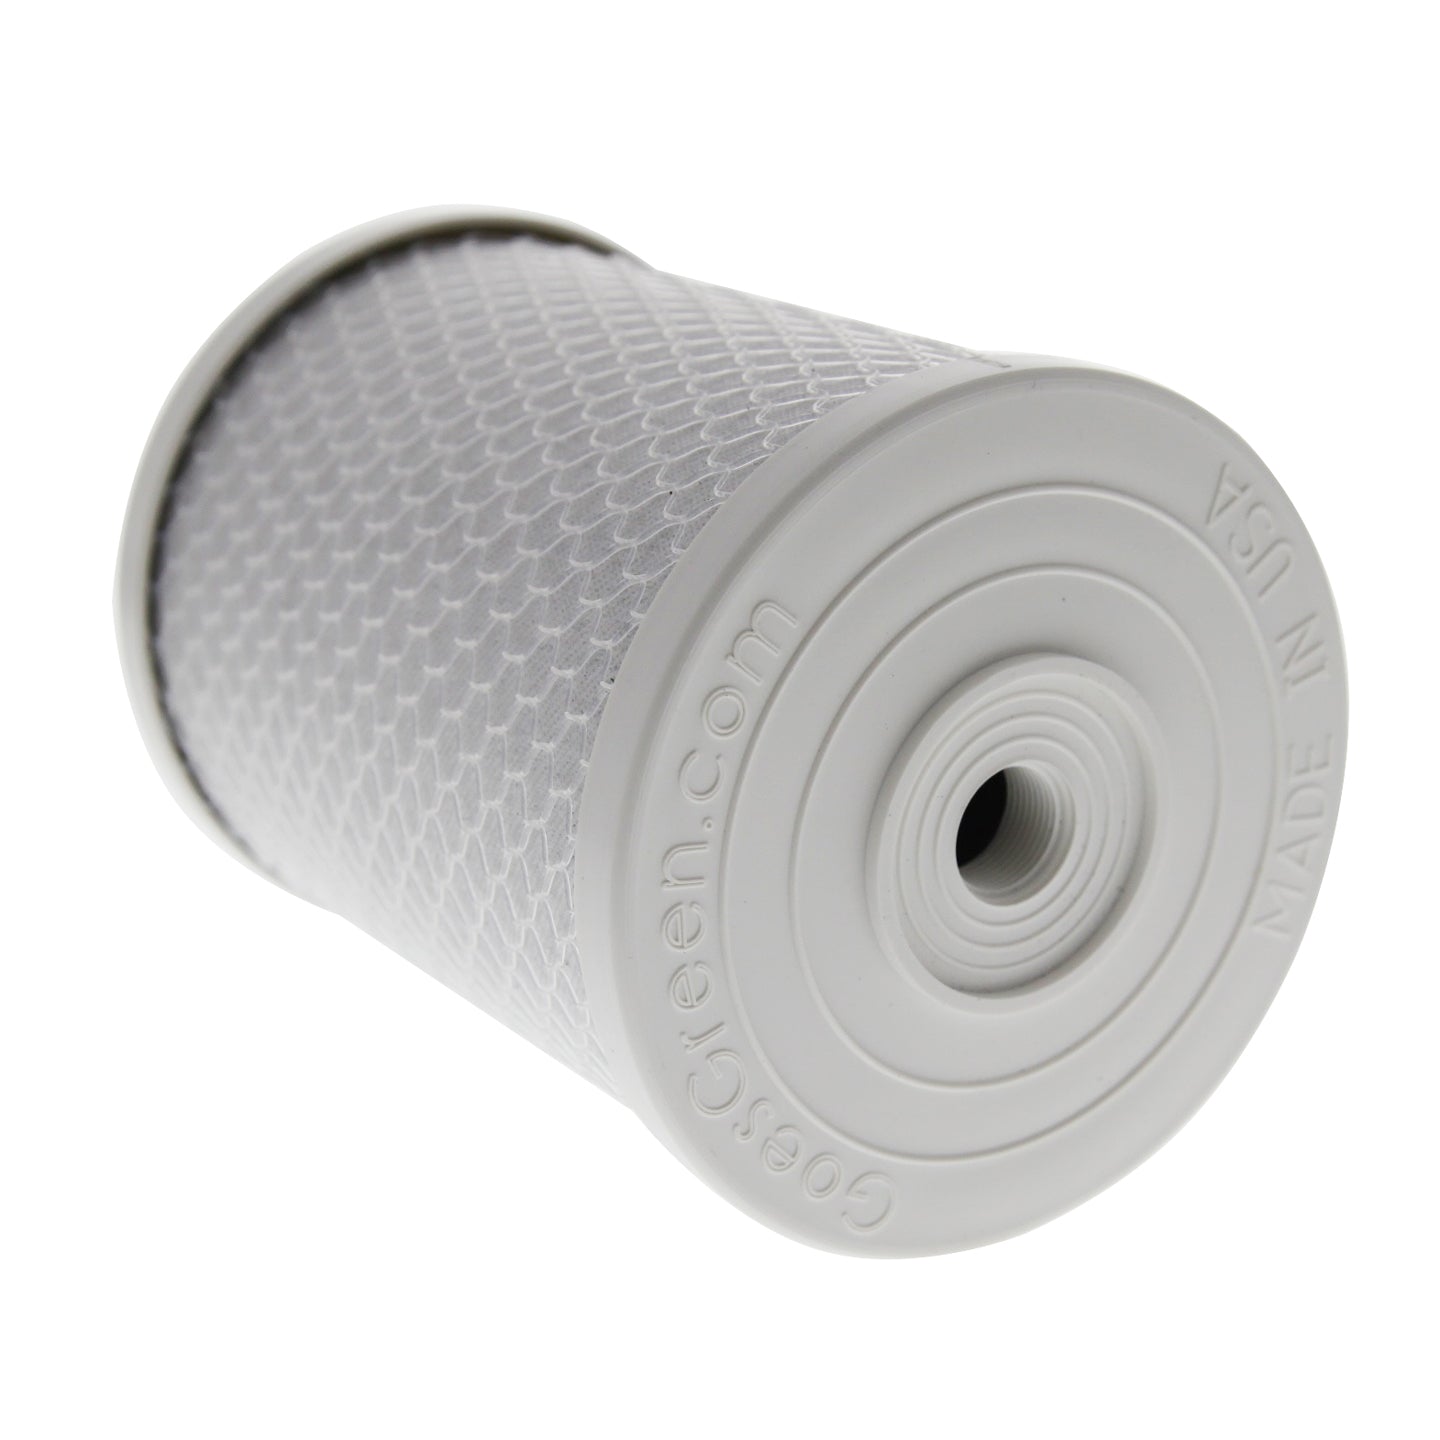 P-12 Under Sink Water Replacement Filter Cartridge by Tier1 (side)